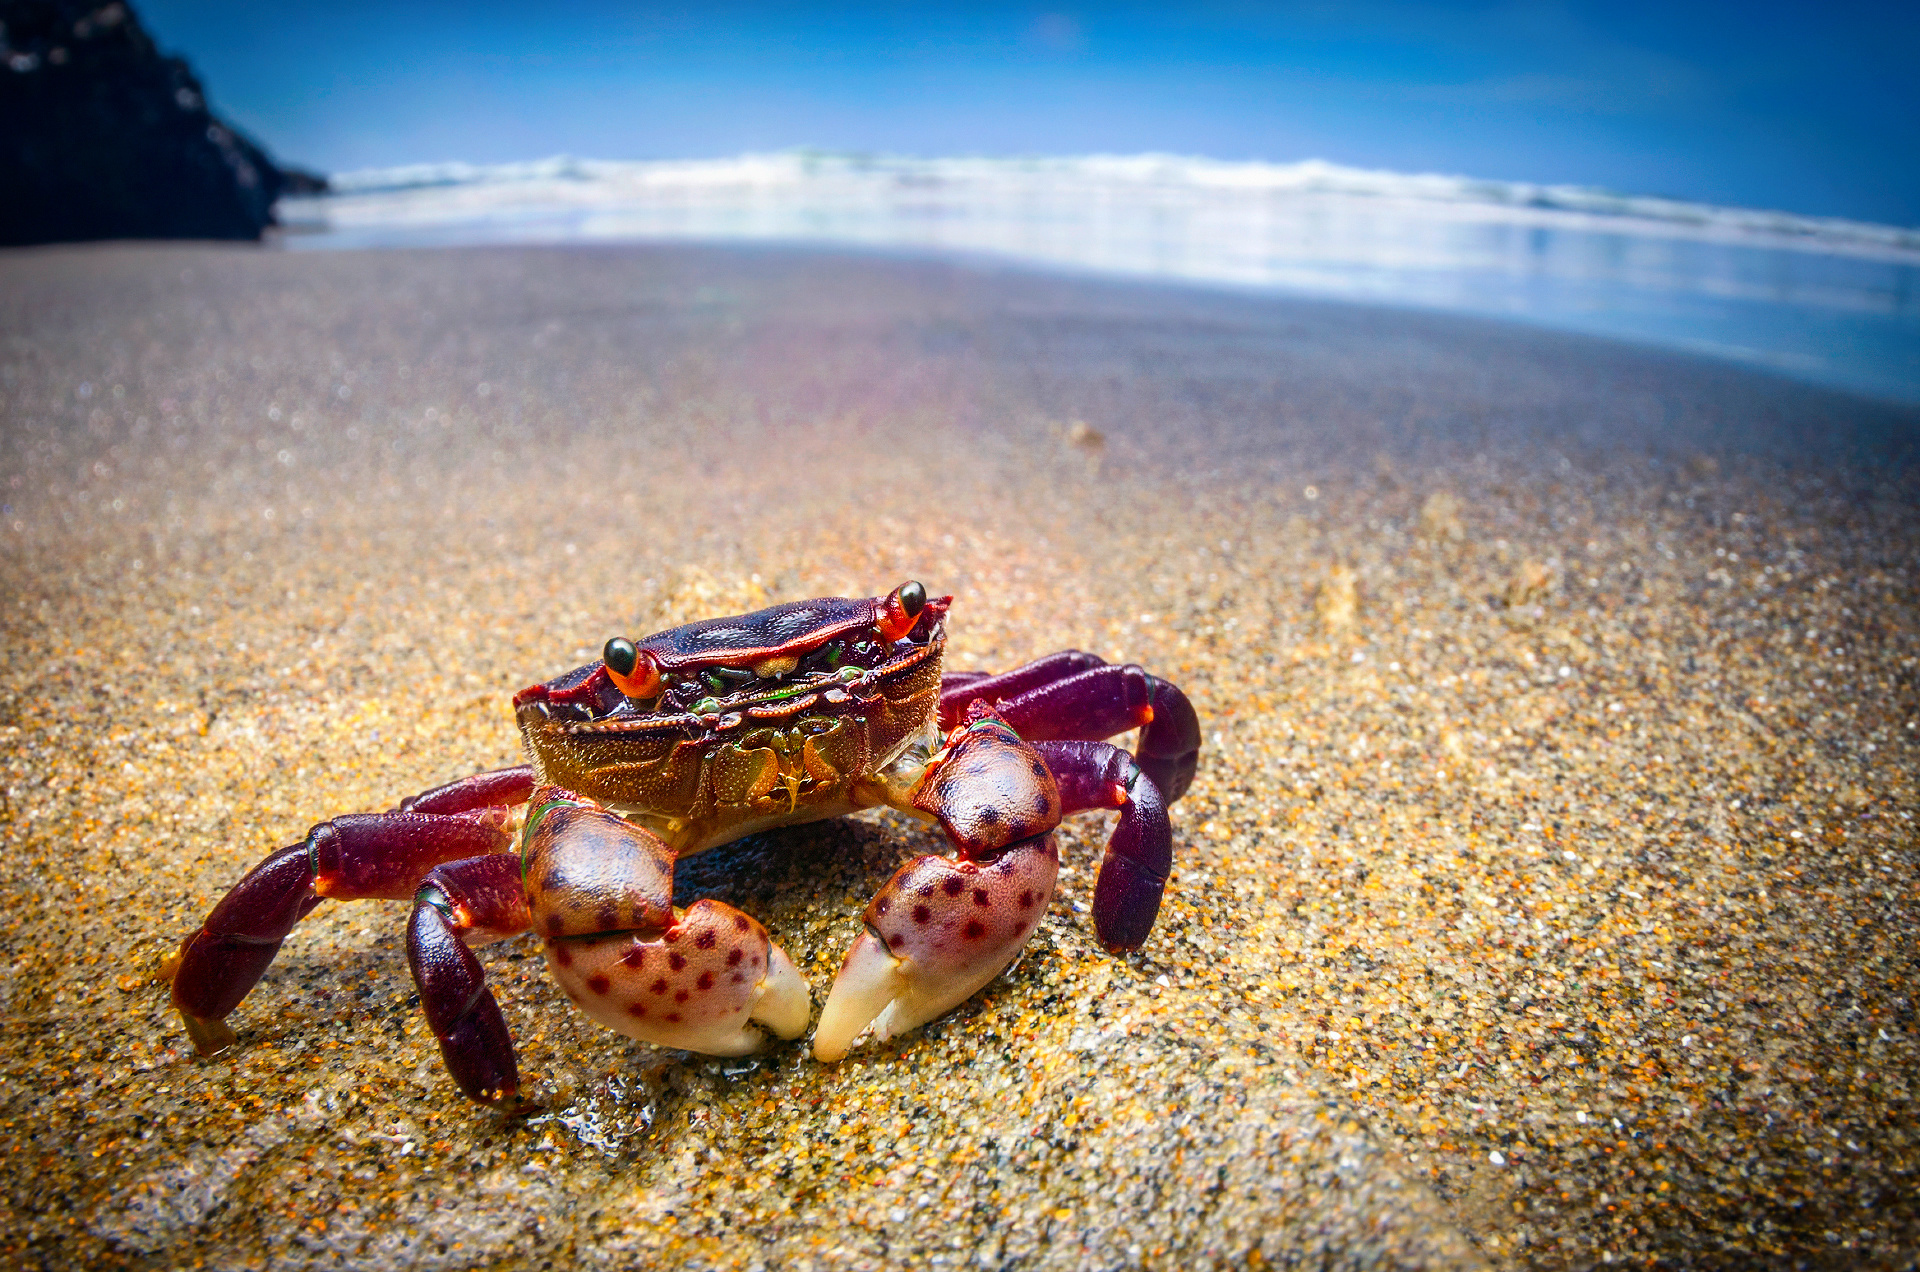 Crab: Beach, Communicate with each other by drumming or waving their pincers. 1920x1280 HD Wallpaper.